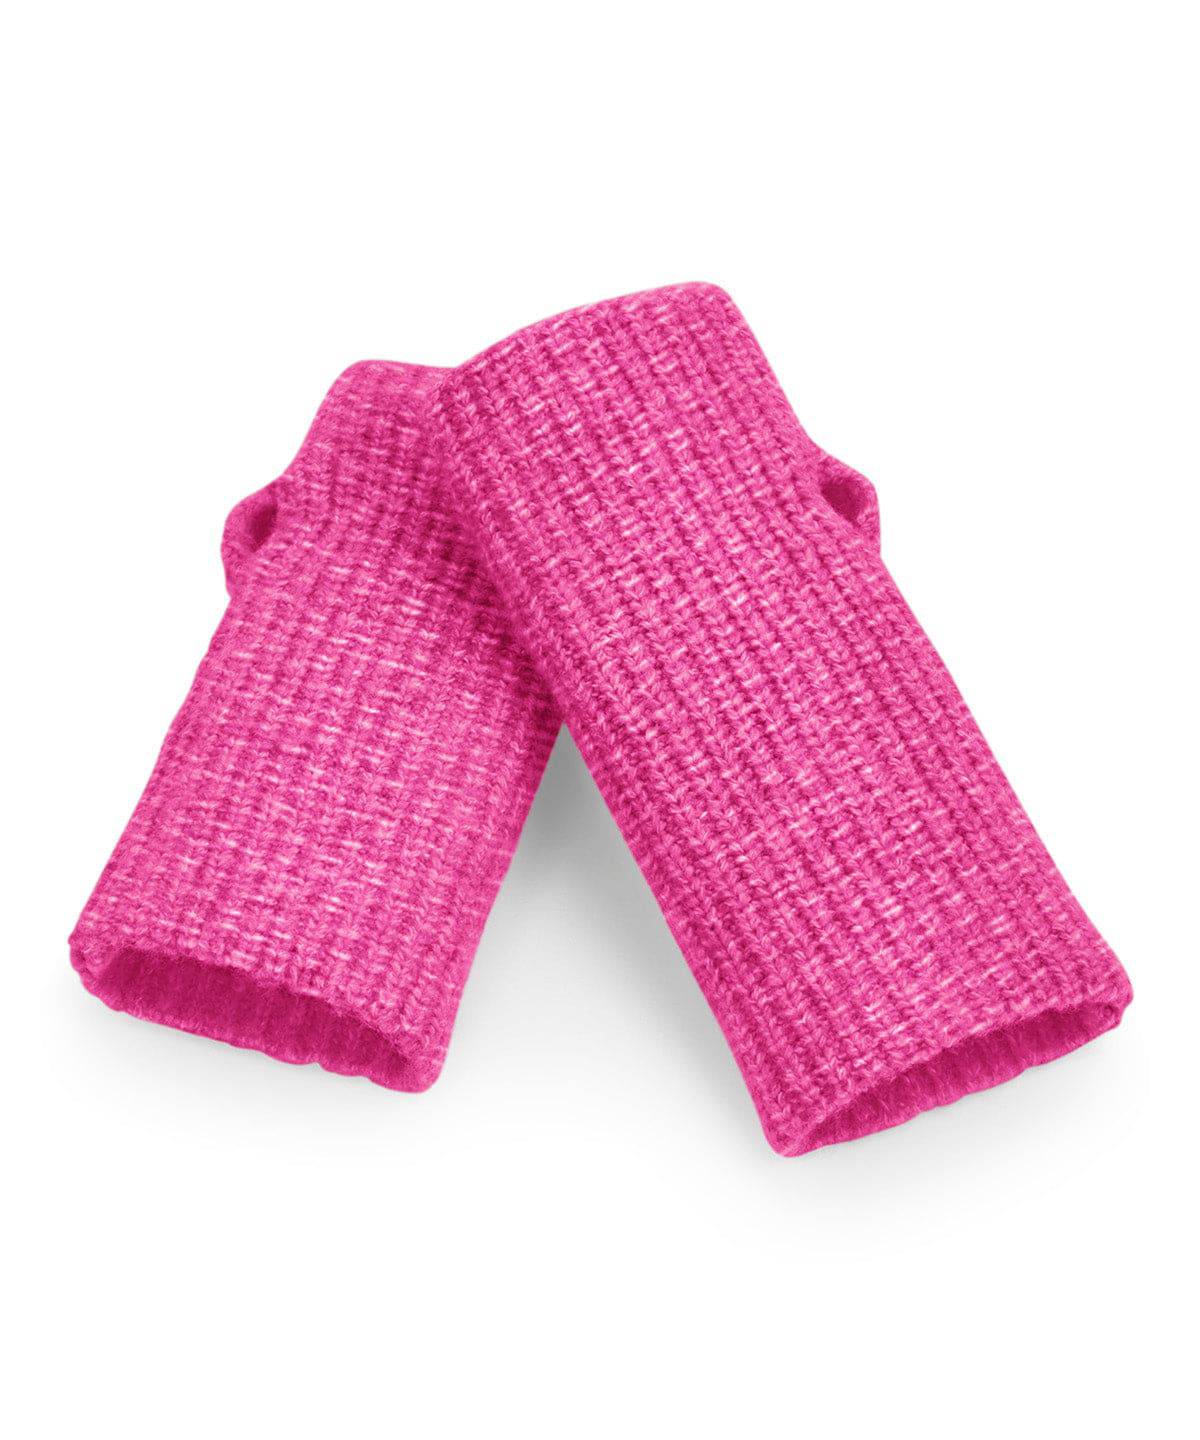 Bright Pink - Colour pop handwarmers